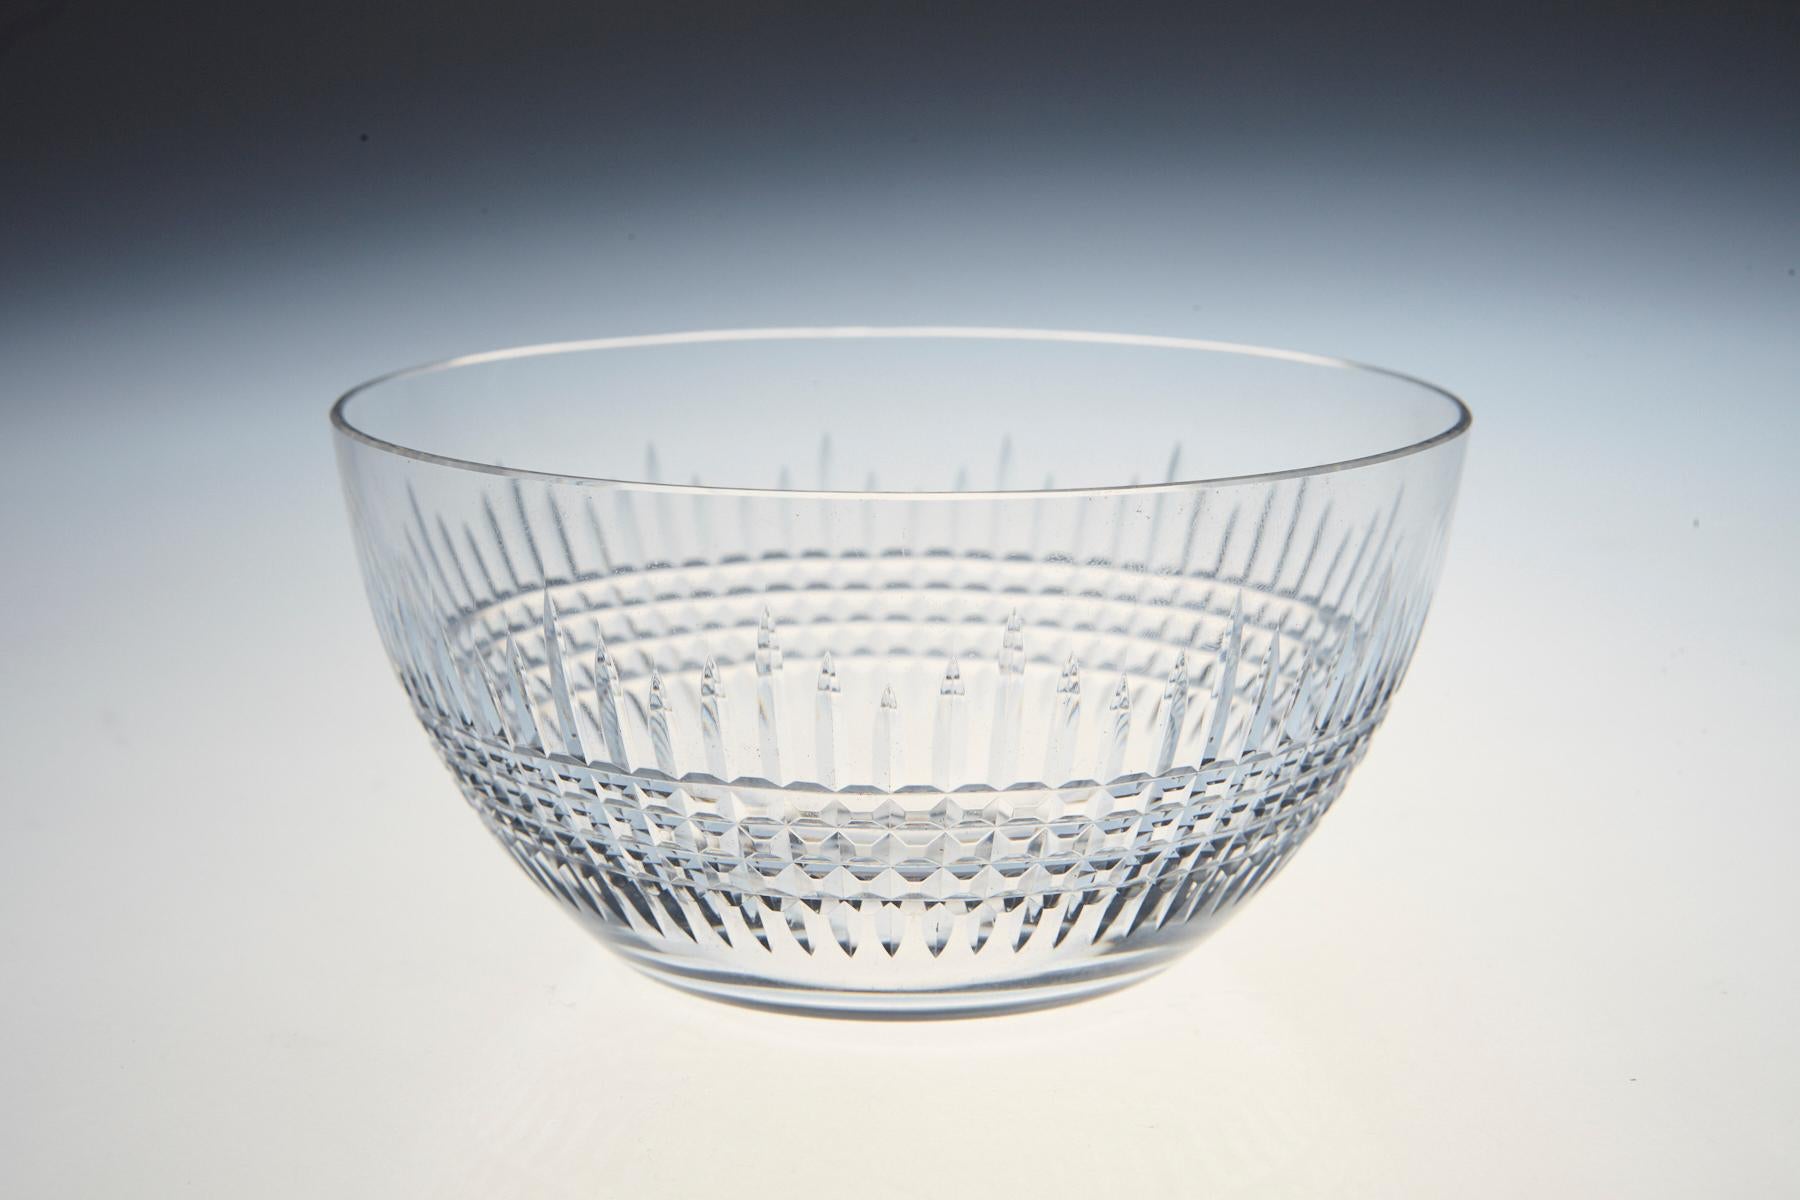 Rare set of 11 Baccarat crystal finger bowls in the 'Nancy' pattern. Would be well suited as ice cream or dessert bowls.
The set is offered as 11 bowls and 1 extra, which has a light chip on the upper edge, please refer to the photo.
This